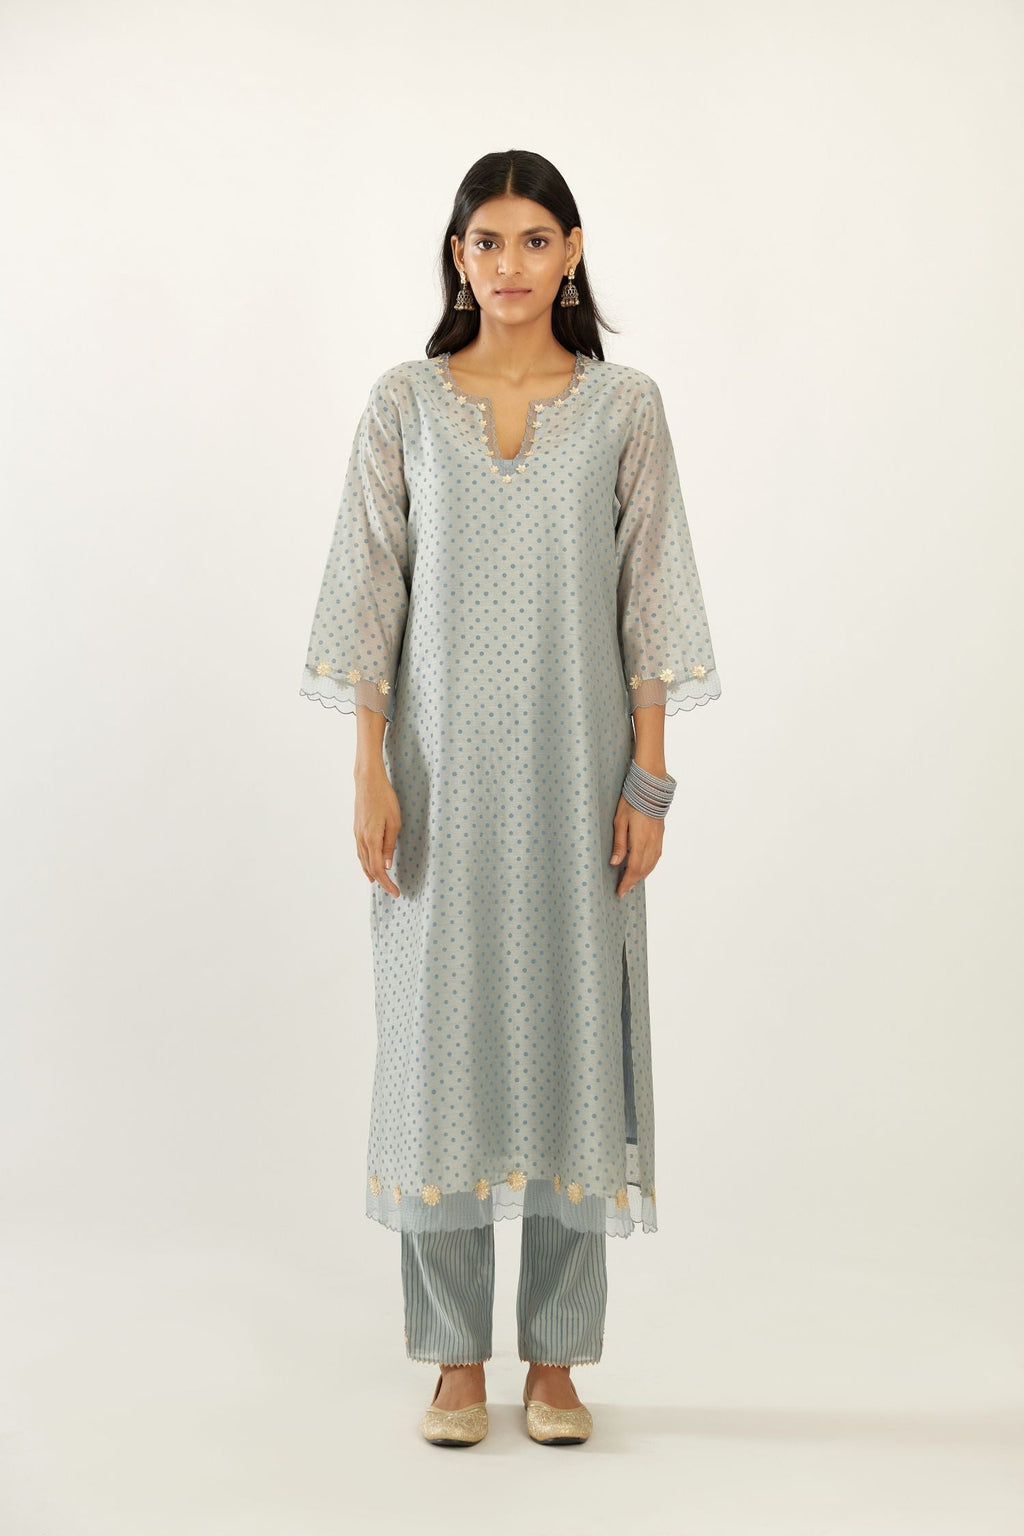 Blue silk chanderi hand block printed straight kurta set, highlighted with organza and gota embroidered flower at edges